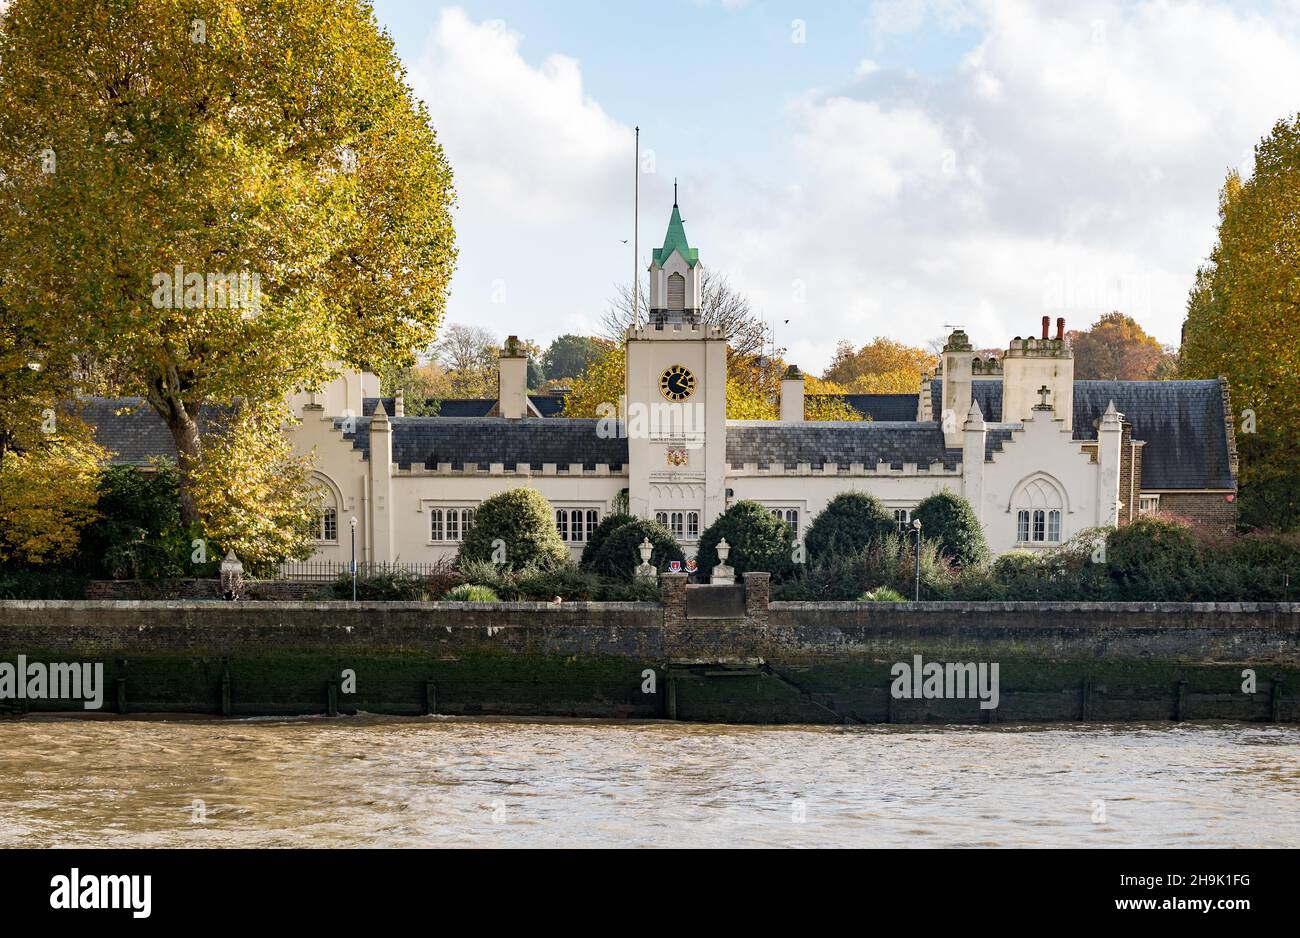 The Trinity Hospital Almshouses in Greenwich. From the Open City Thames Architecture Tour East. Photo date: Saturday, November 10, 2018. Photo credit should read: Richard Gray/EMPICS Stock Photo